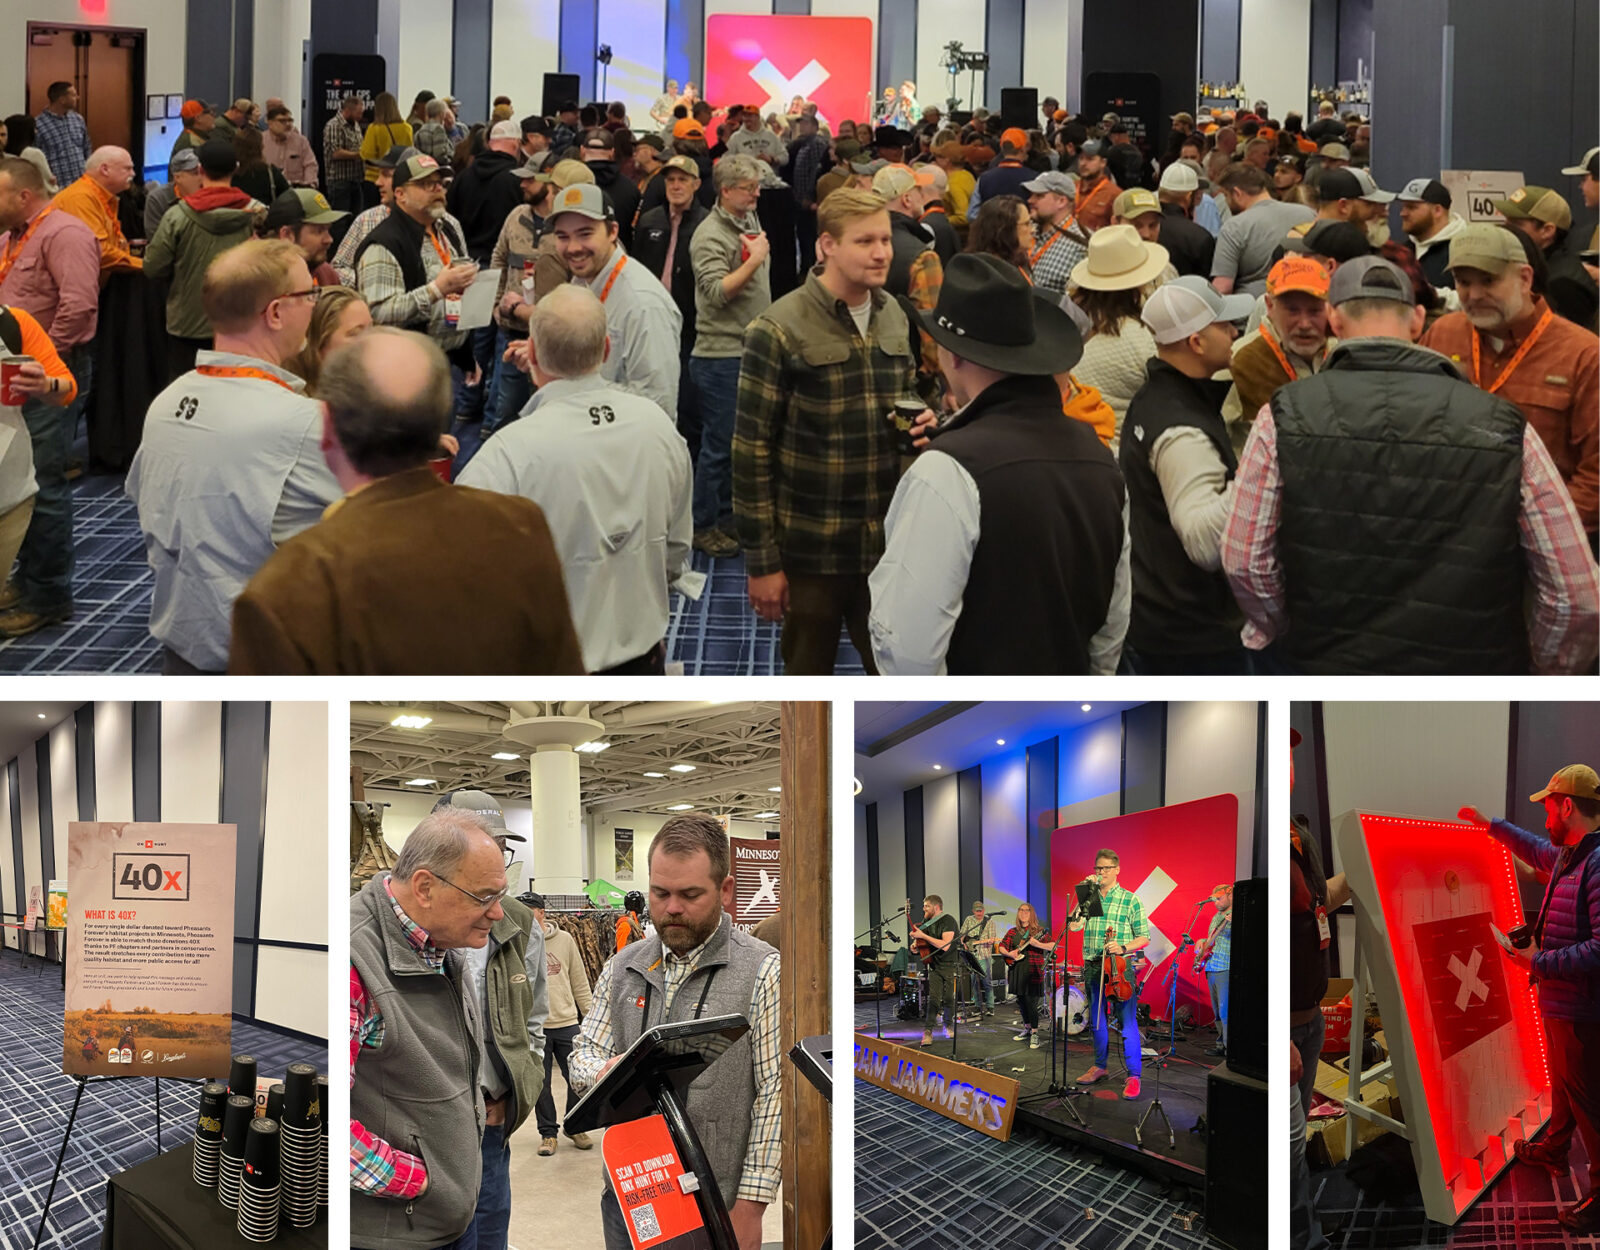 A collage of photos showing people at a conference.